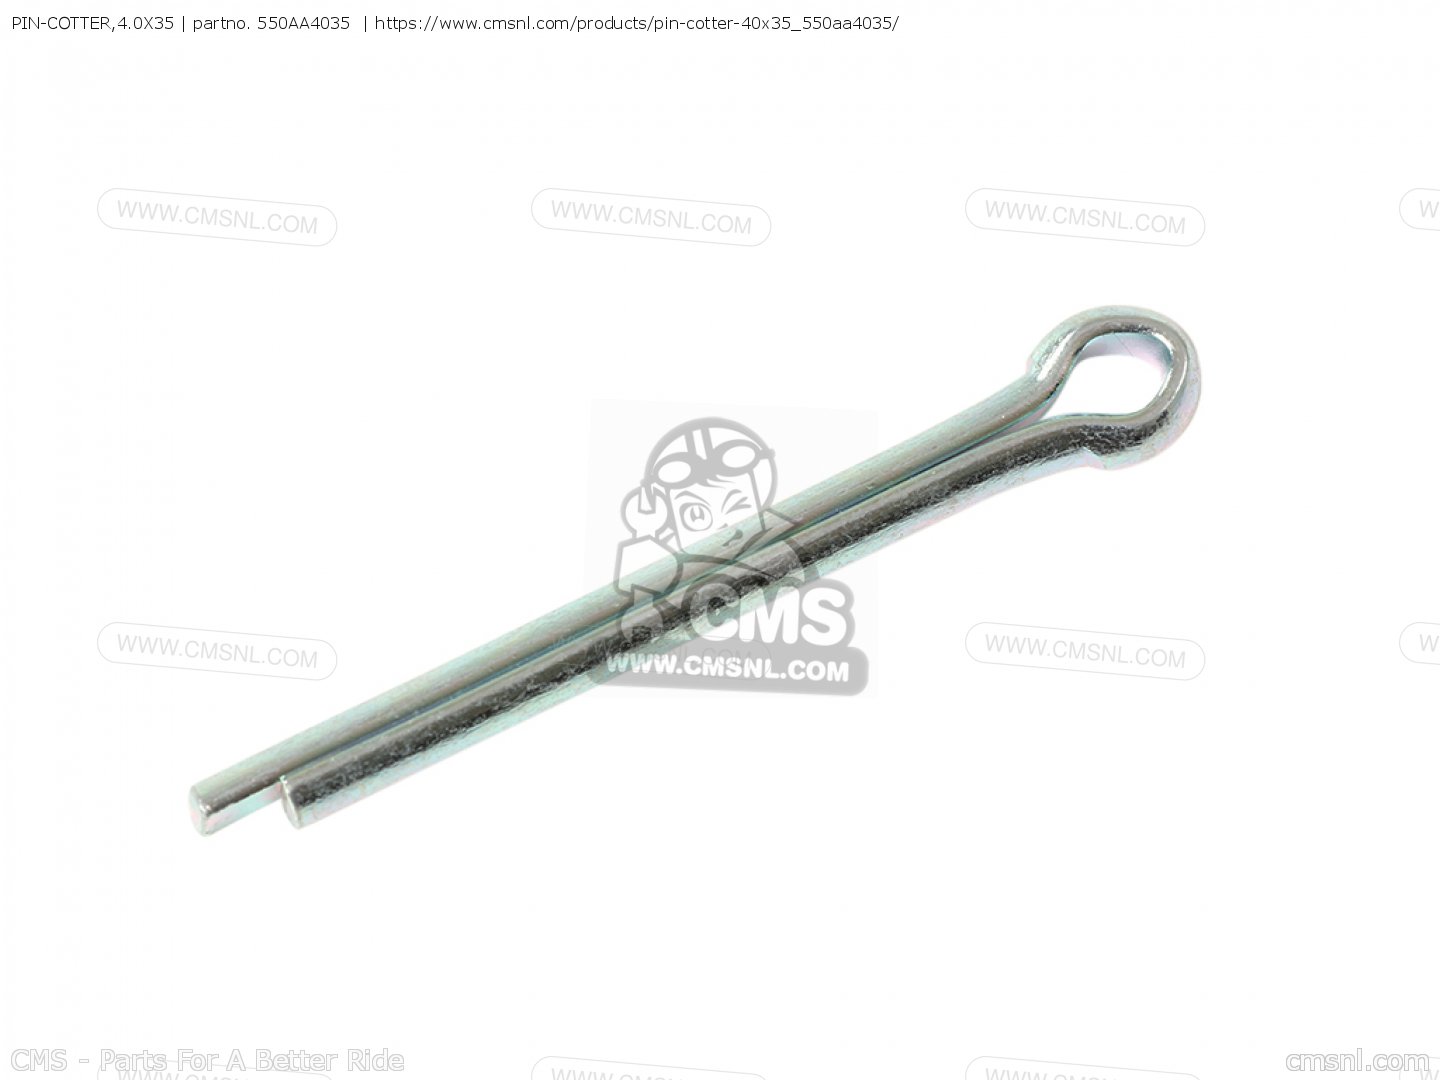 PIN-COTTER,4.0X35 for ZX1000FAF NINJA ZX10R 2010 USA - order at CMSNL